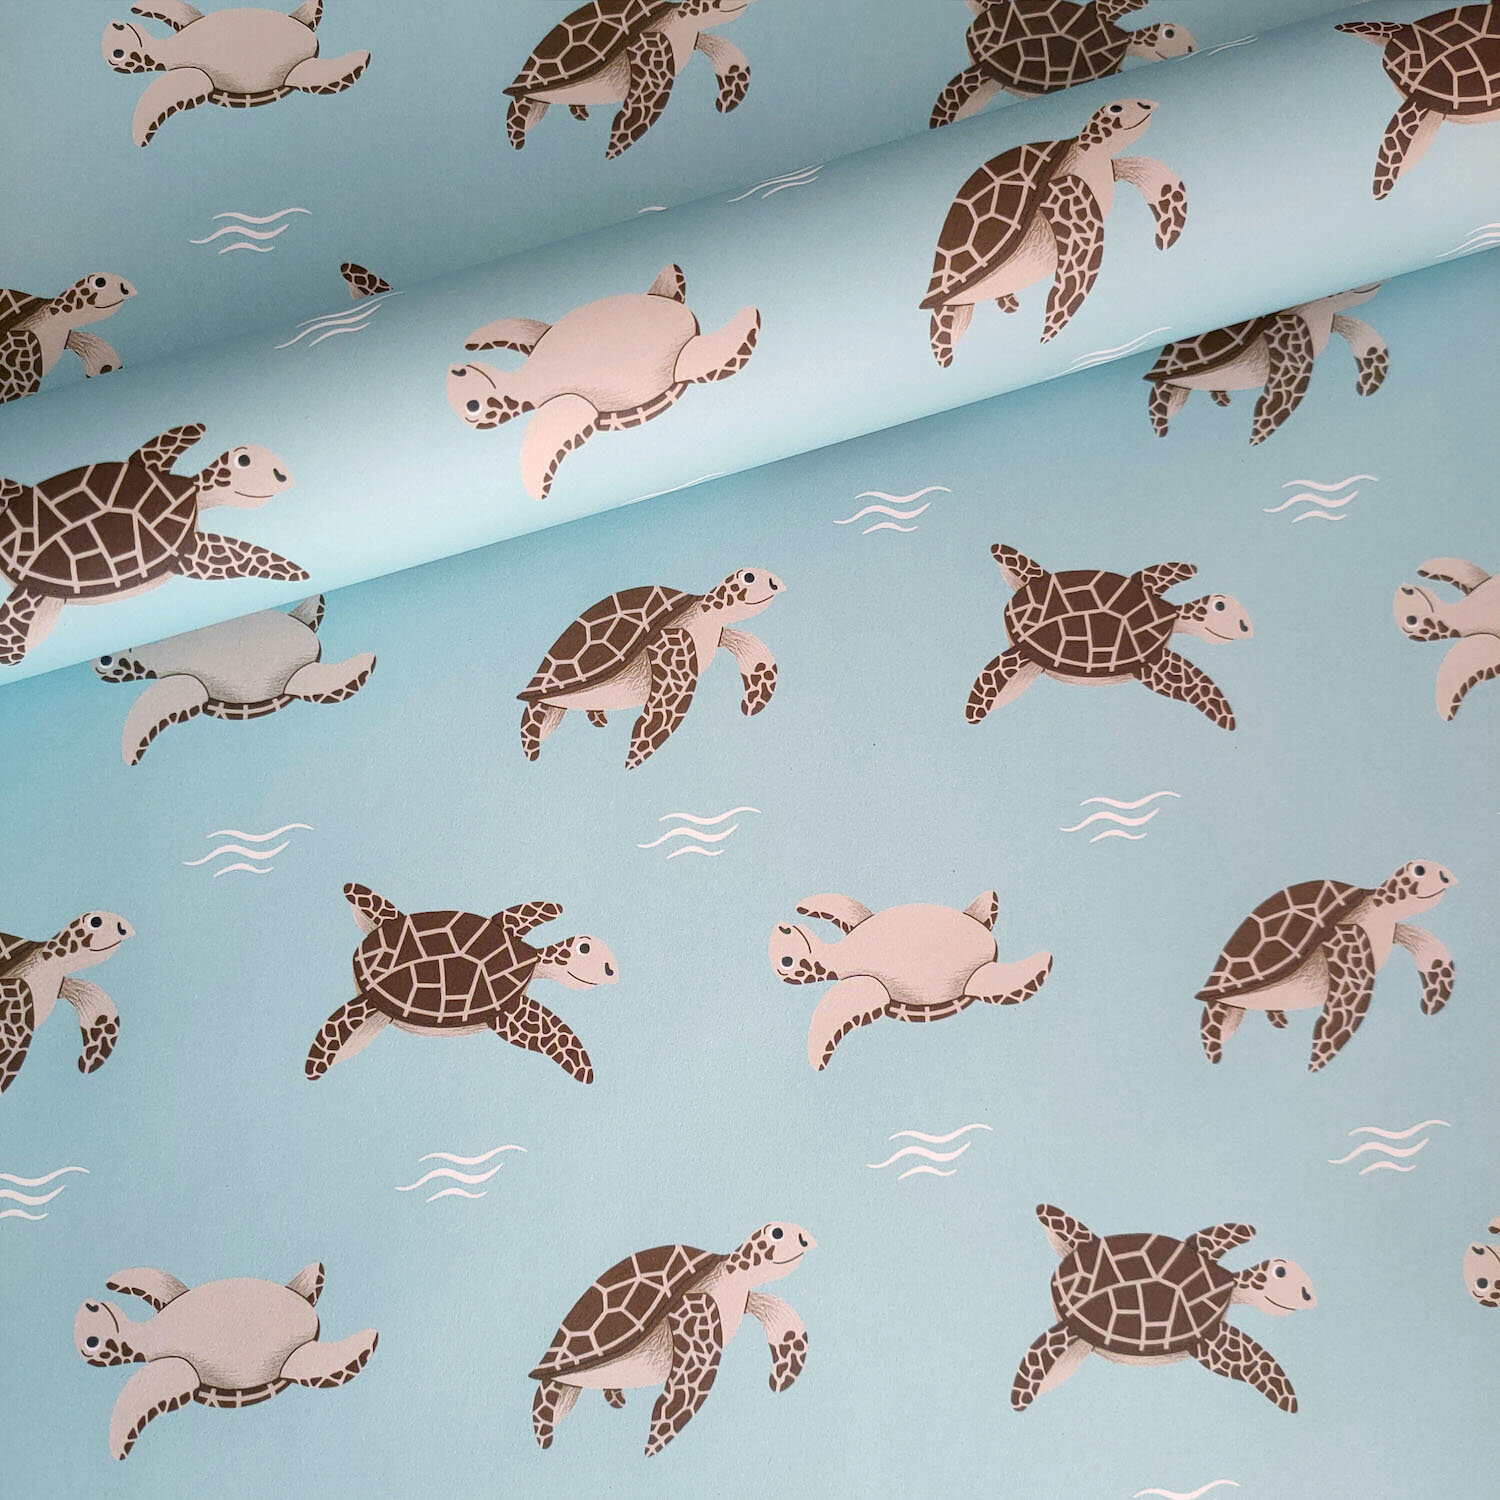 Turtle Wrapping Paper Photo 2.jpg